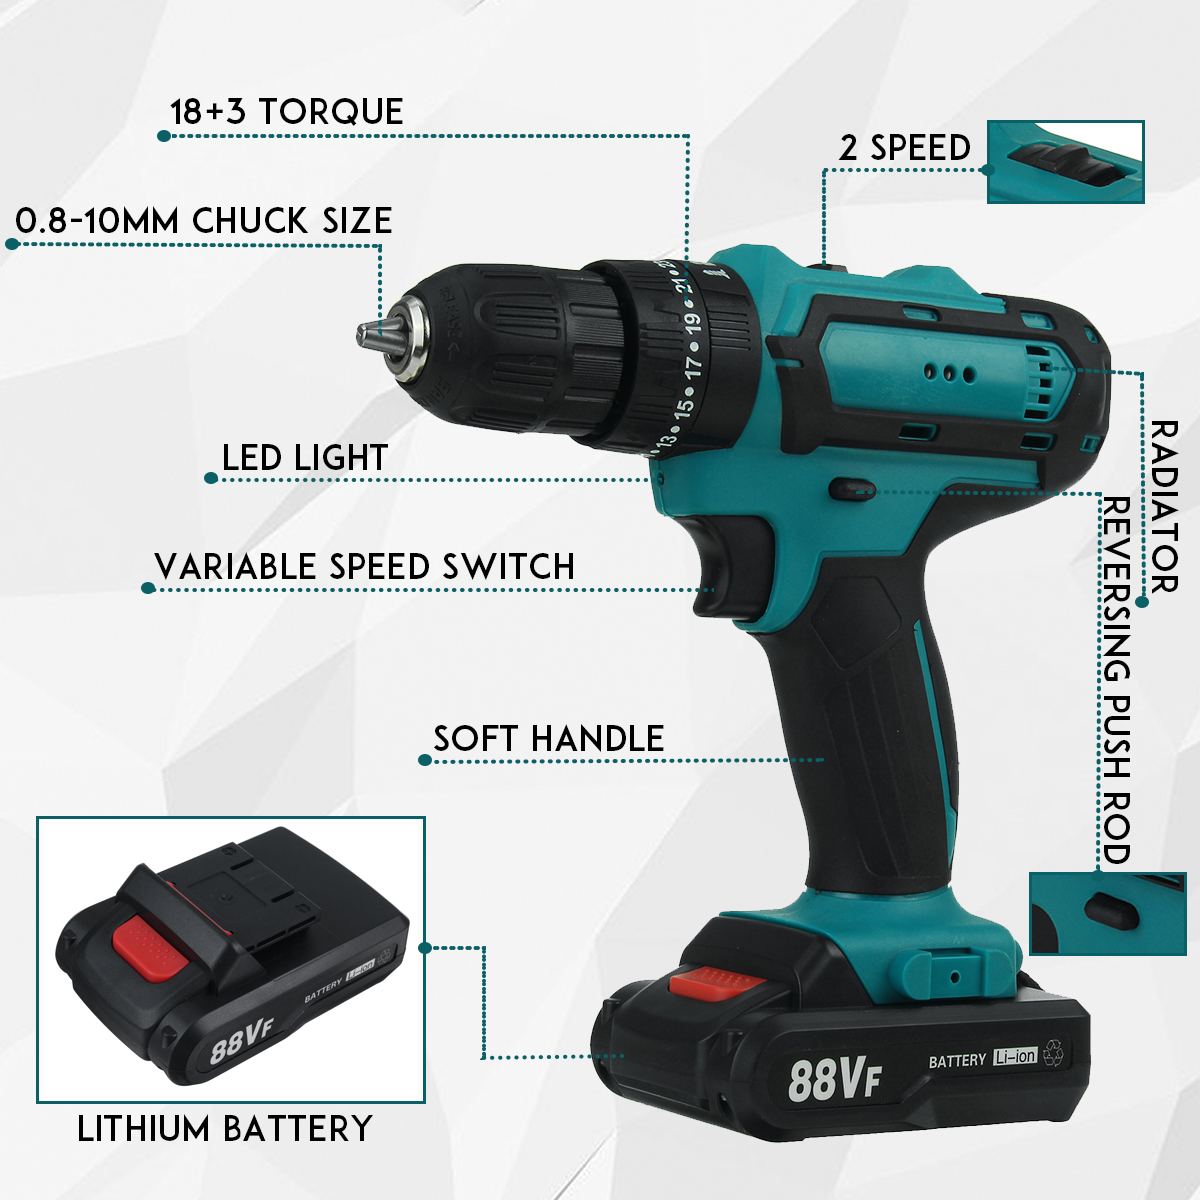 88VF-Cordless-Drill-3-IN-1-Electric-Screwdriver-Hammer-Impact-Drill-7500mAh-2-Speed-1787578-5